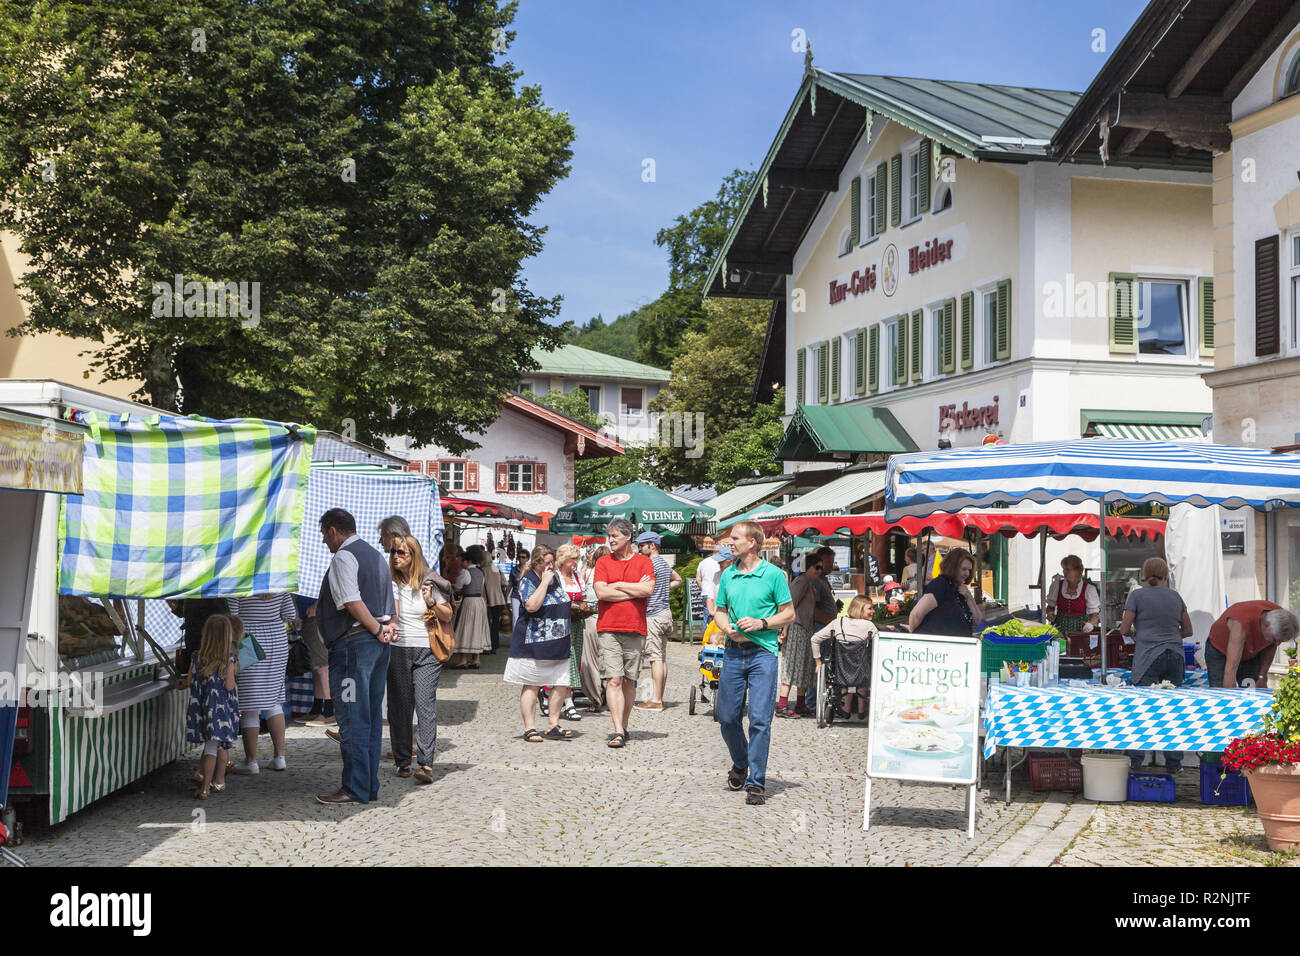 farmer's market on the market square in Prien am Chiemsee, Chiemgau, Upper Bavaria, Bavaria, southern Germany, Germany, Europe Stock Photo